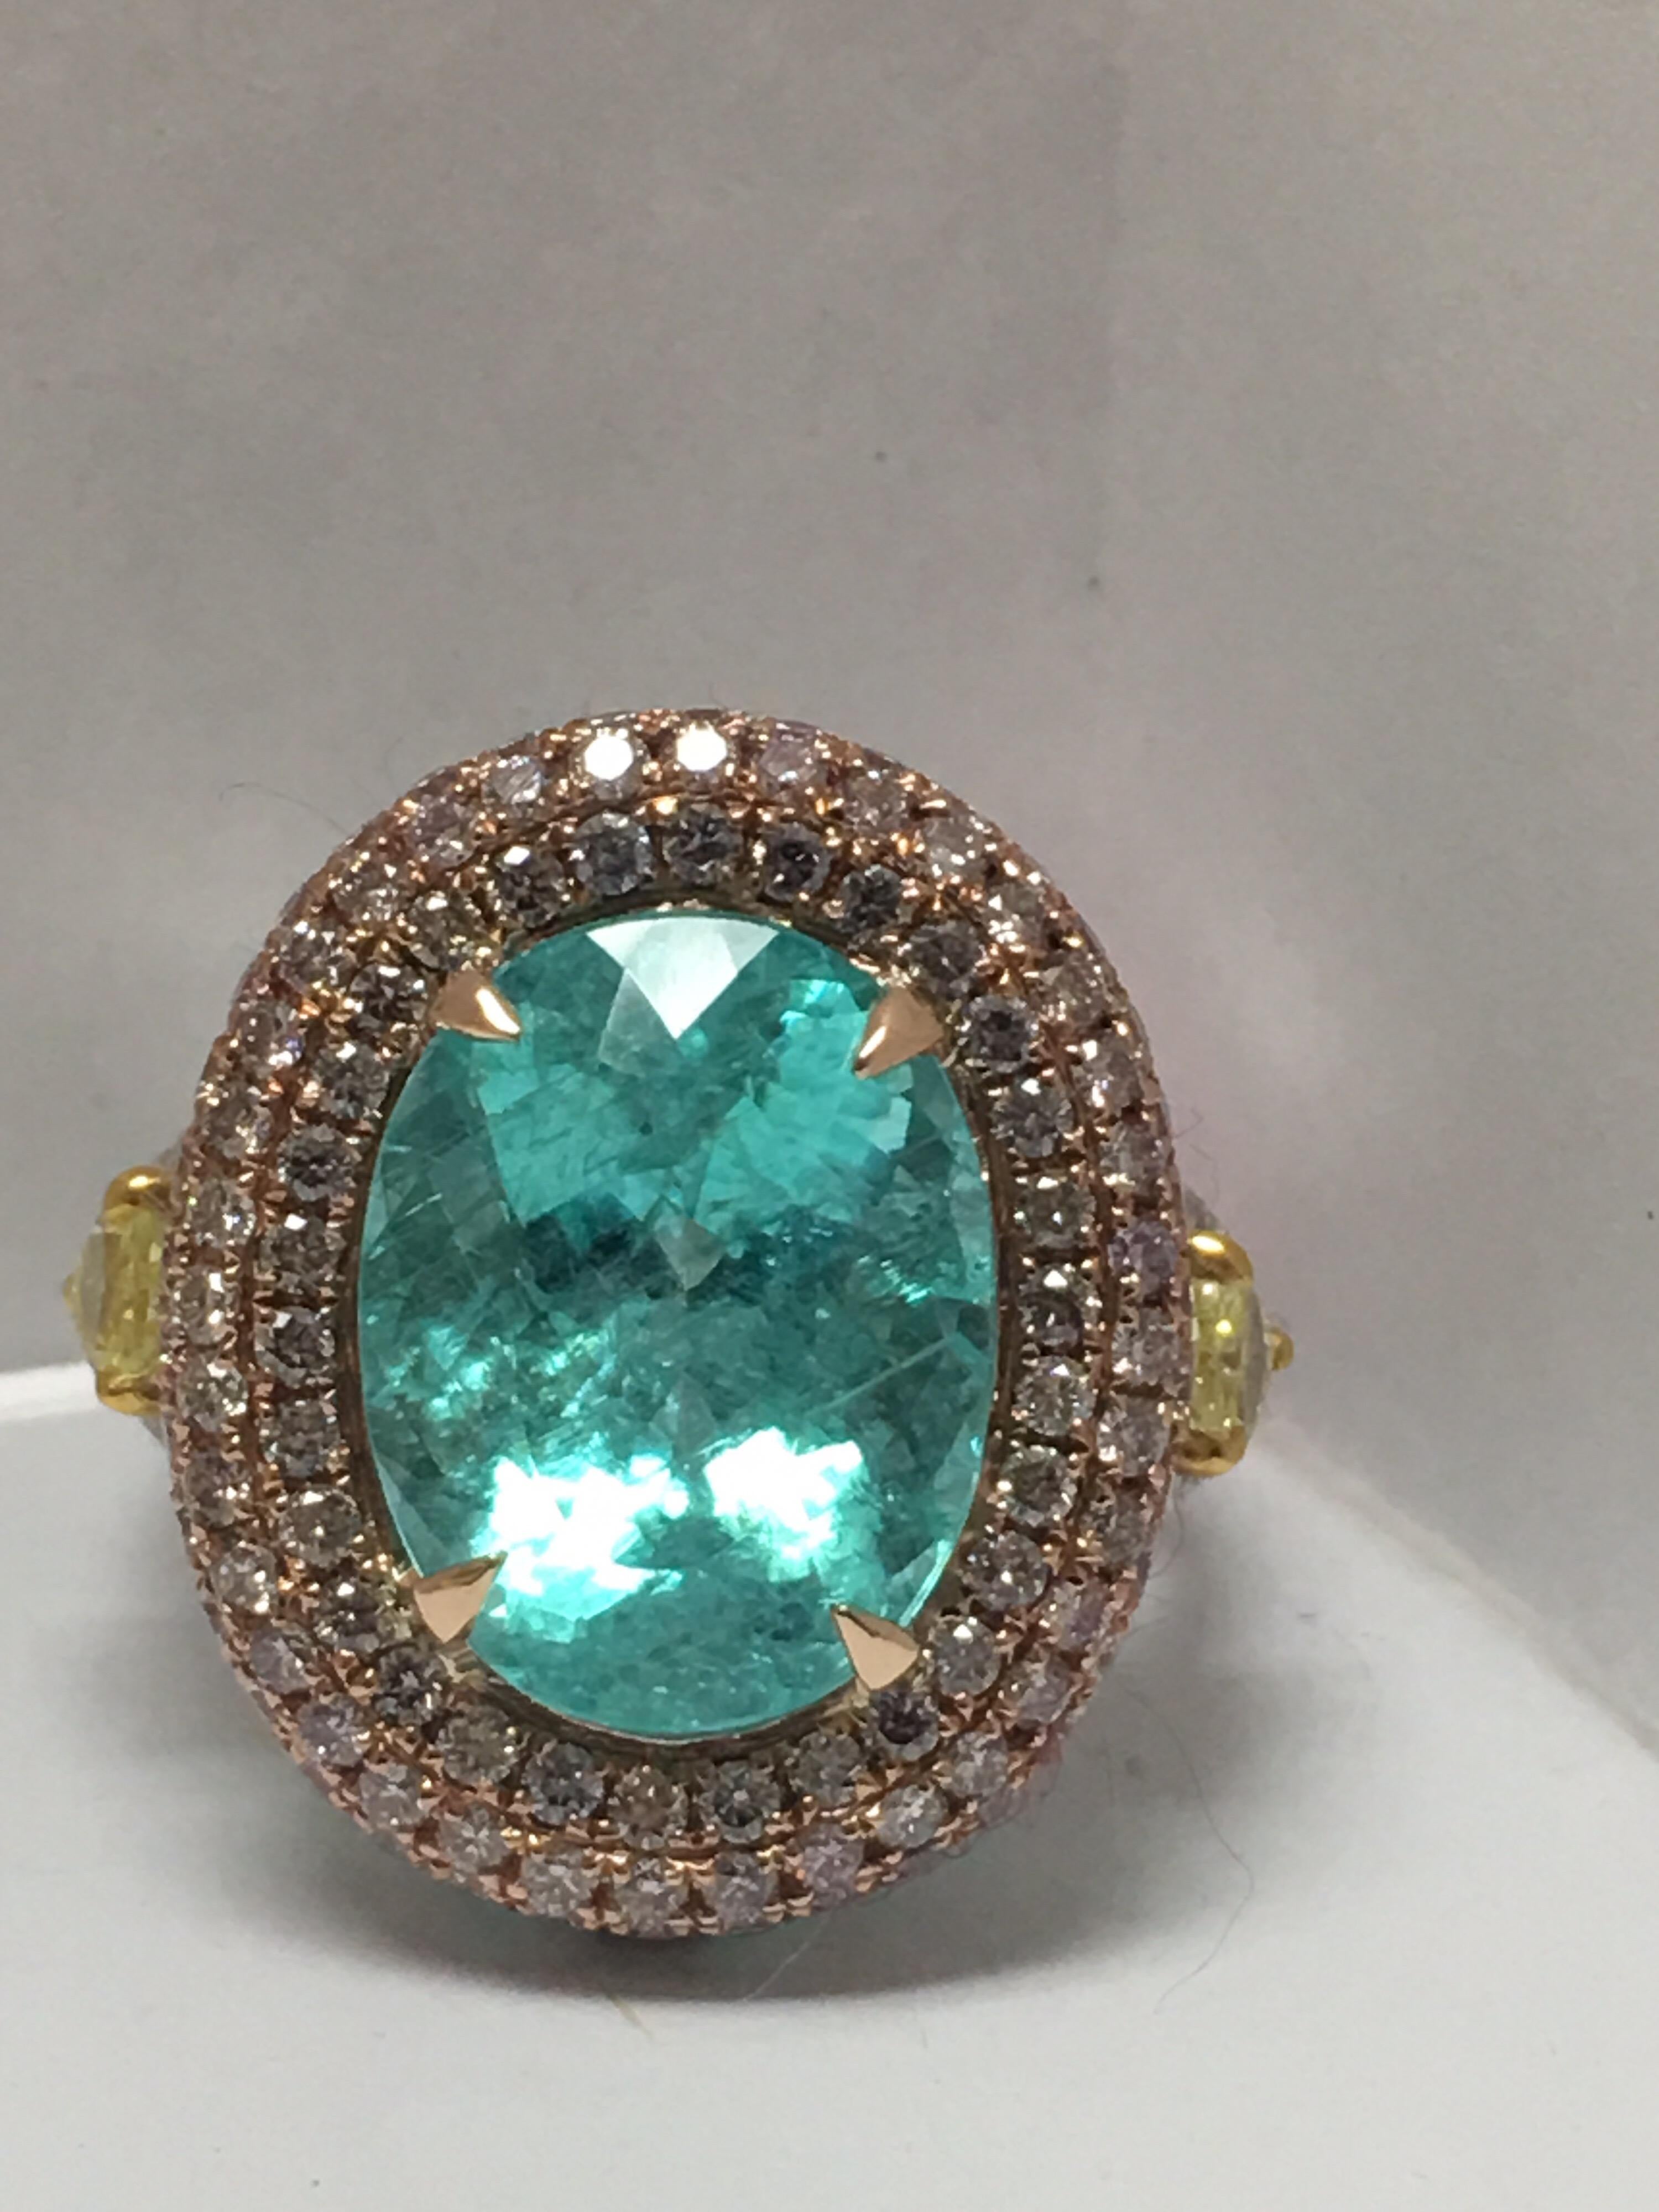 Natural 8.14 Carat Paraiba Tourmaline set with 0.52 Carat Intense Yellow Pear shape diamond,Pink Diamonds Halo 1.19 Carat and other white diamonds 0.26 Carat set in 18K three tone gold is size 7 ring and can be resize if needed.